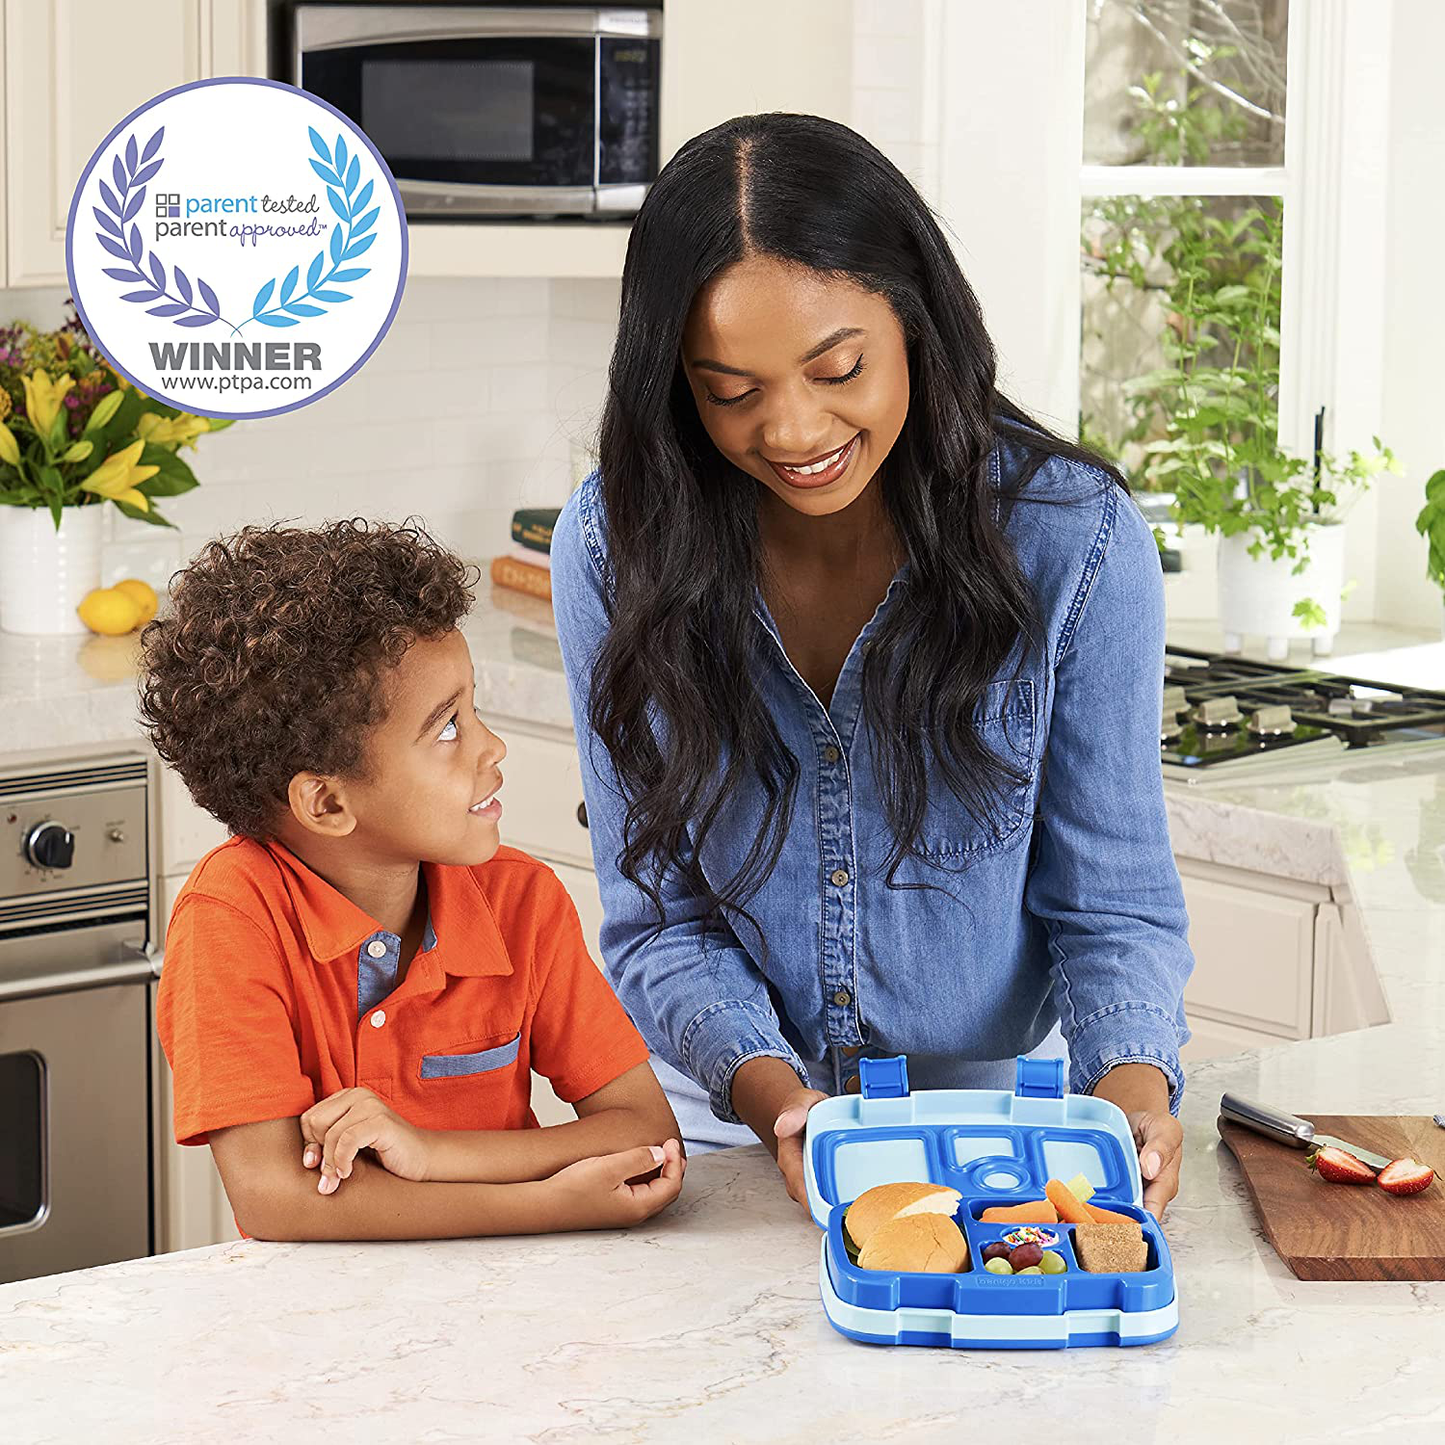 Bentgo Kids Children’s Lunch Box - Leak-Proof, 5-Compartment Bento-Style Kids Lunch Box - Ideal Portion Sizes for Ages 3 to 7 - BPA-Free, Dishwasher Safe, Food-Safe Materials (Blue)